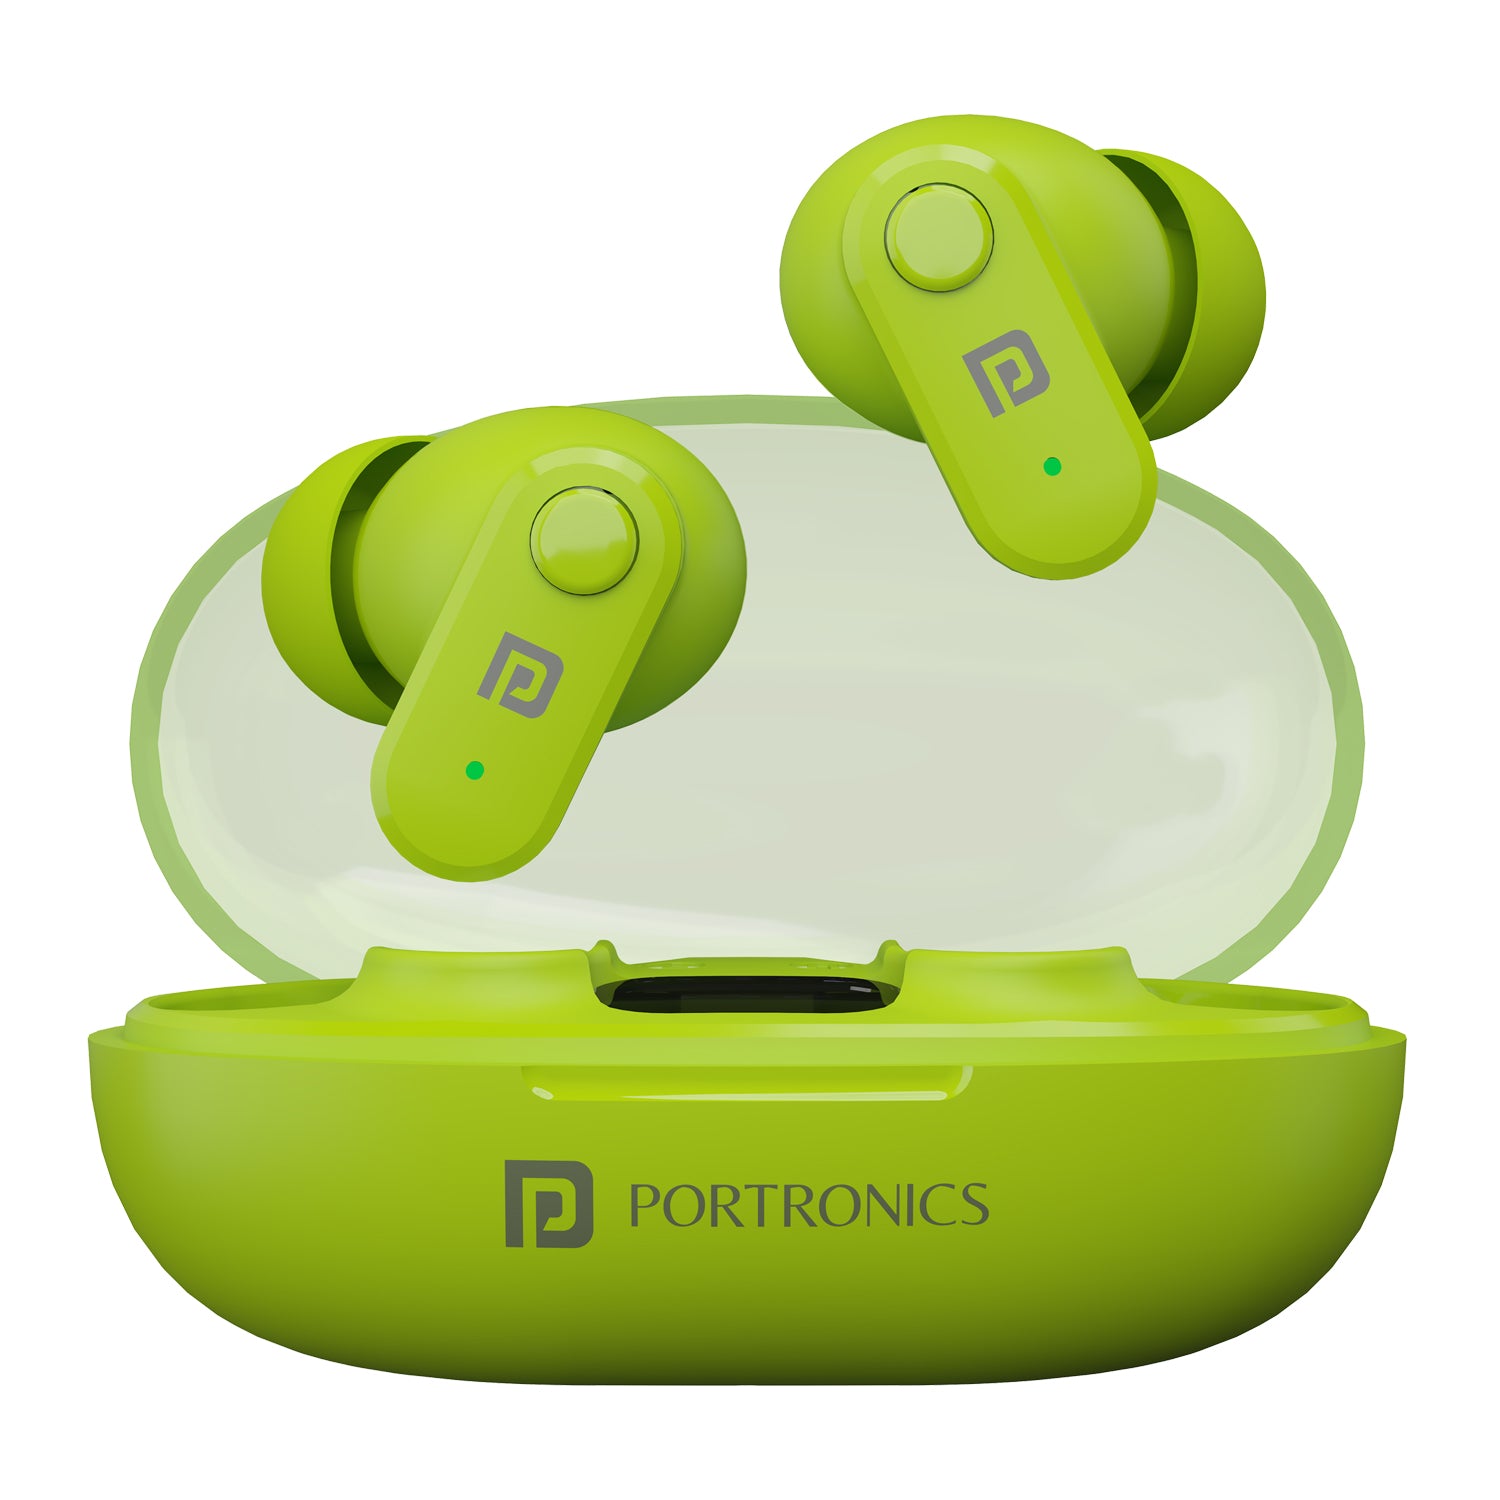 Portronics Harmonics Twins s16 Smart wireless TWS earbuds| earbuds with noise cancelling online| Bluetooth earbuds with mic| best earbuds at affordable price